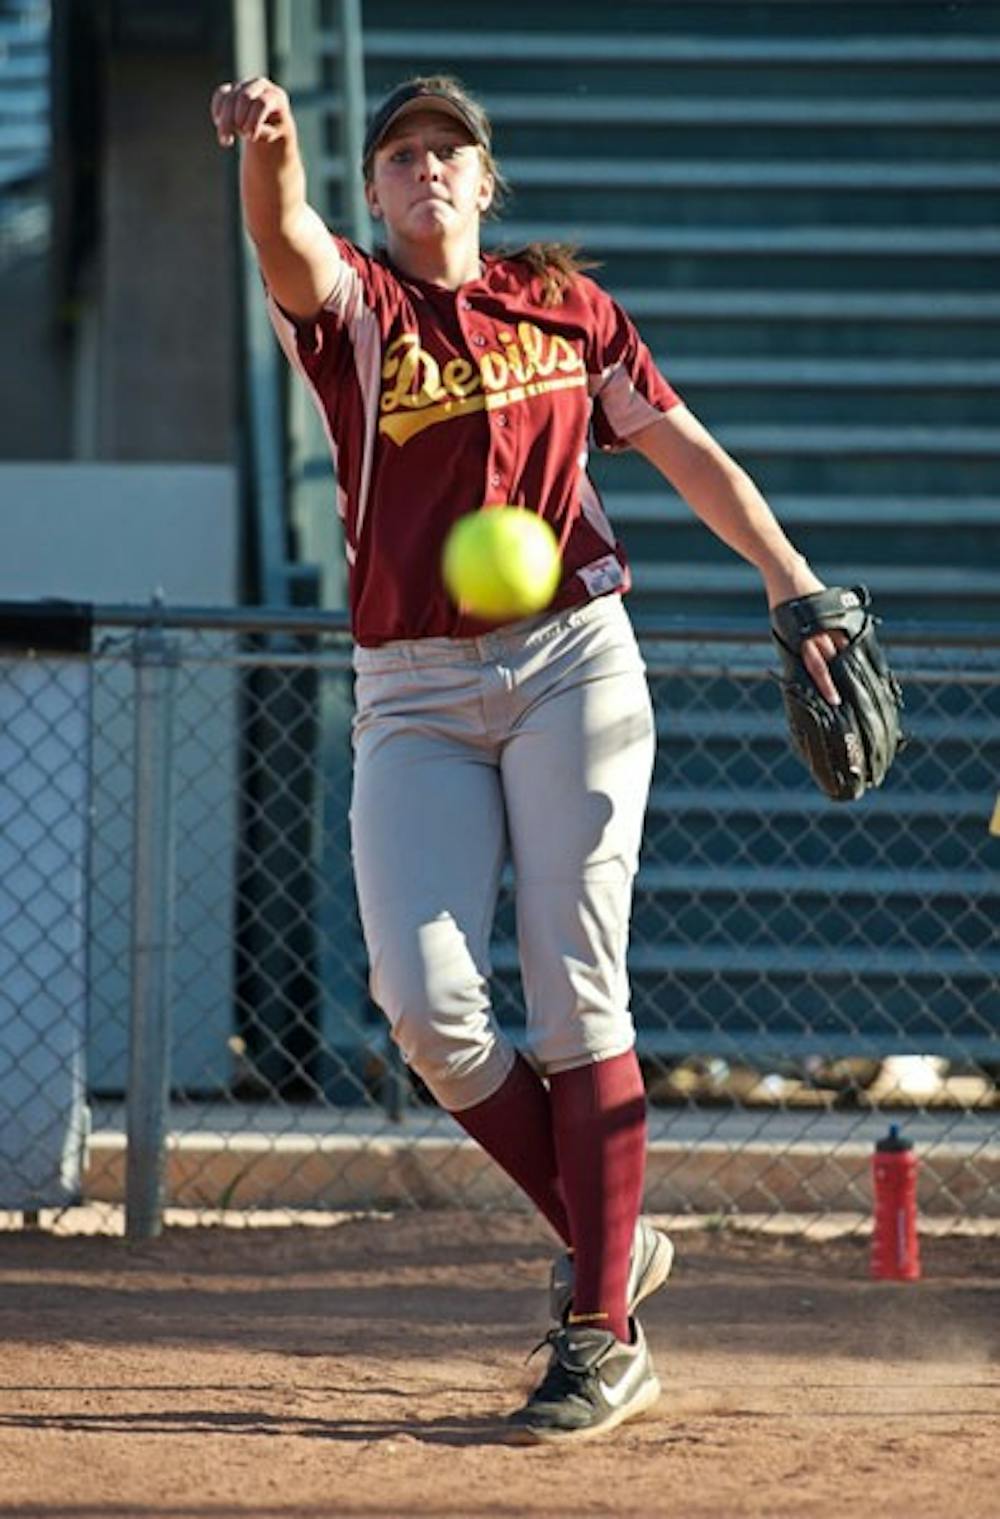 COOL CUSTOMER: ASU sophomore pitcher Hillary Bach has posted a 17-2 record with a 1.99 ERA in 2010, but she’s also known for using her happy personality to stay calm in the circle. (Photo by Michael Arellano)